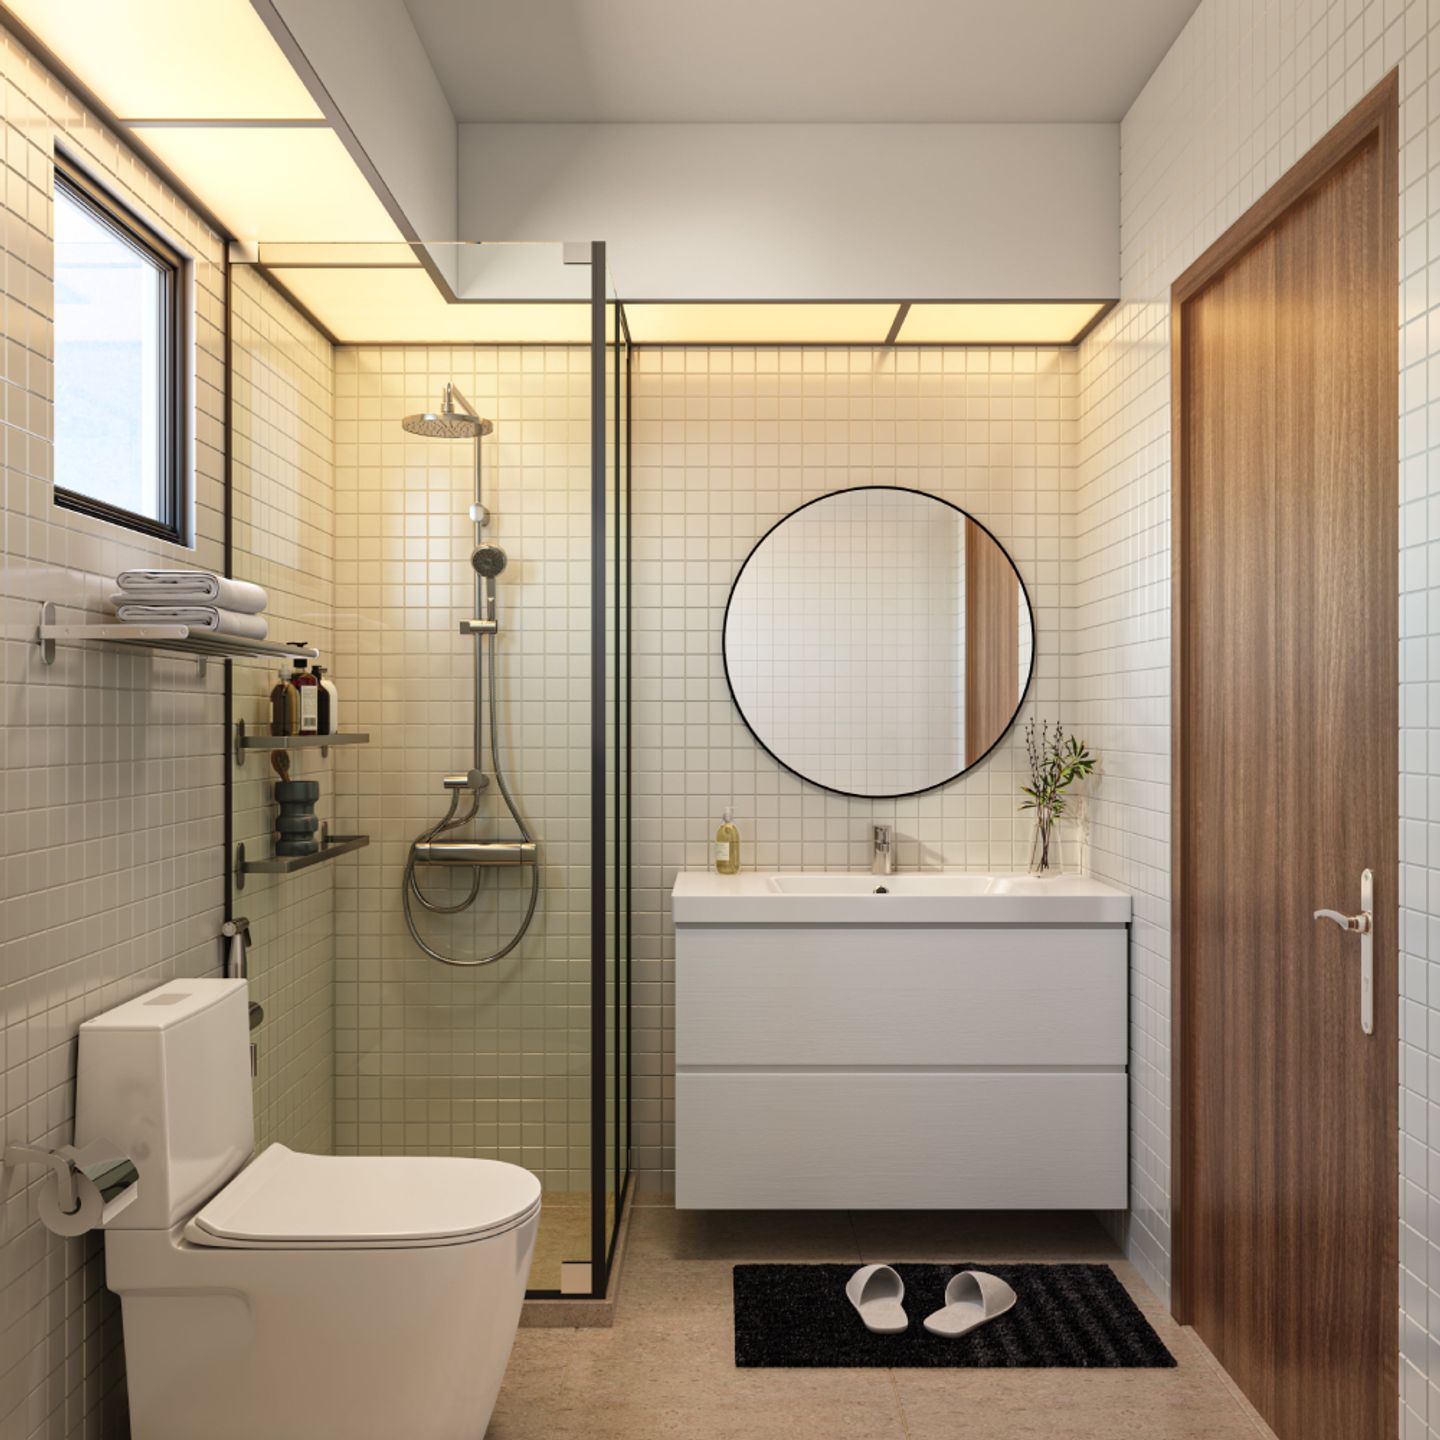 Bathroom Design With Wall-Mounted White Vanity And A Separate Shower Area - Livspace